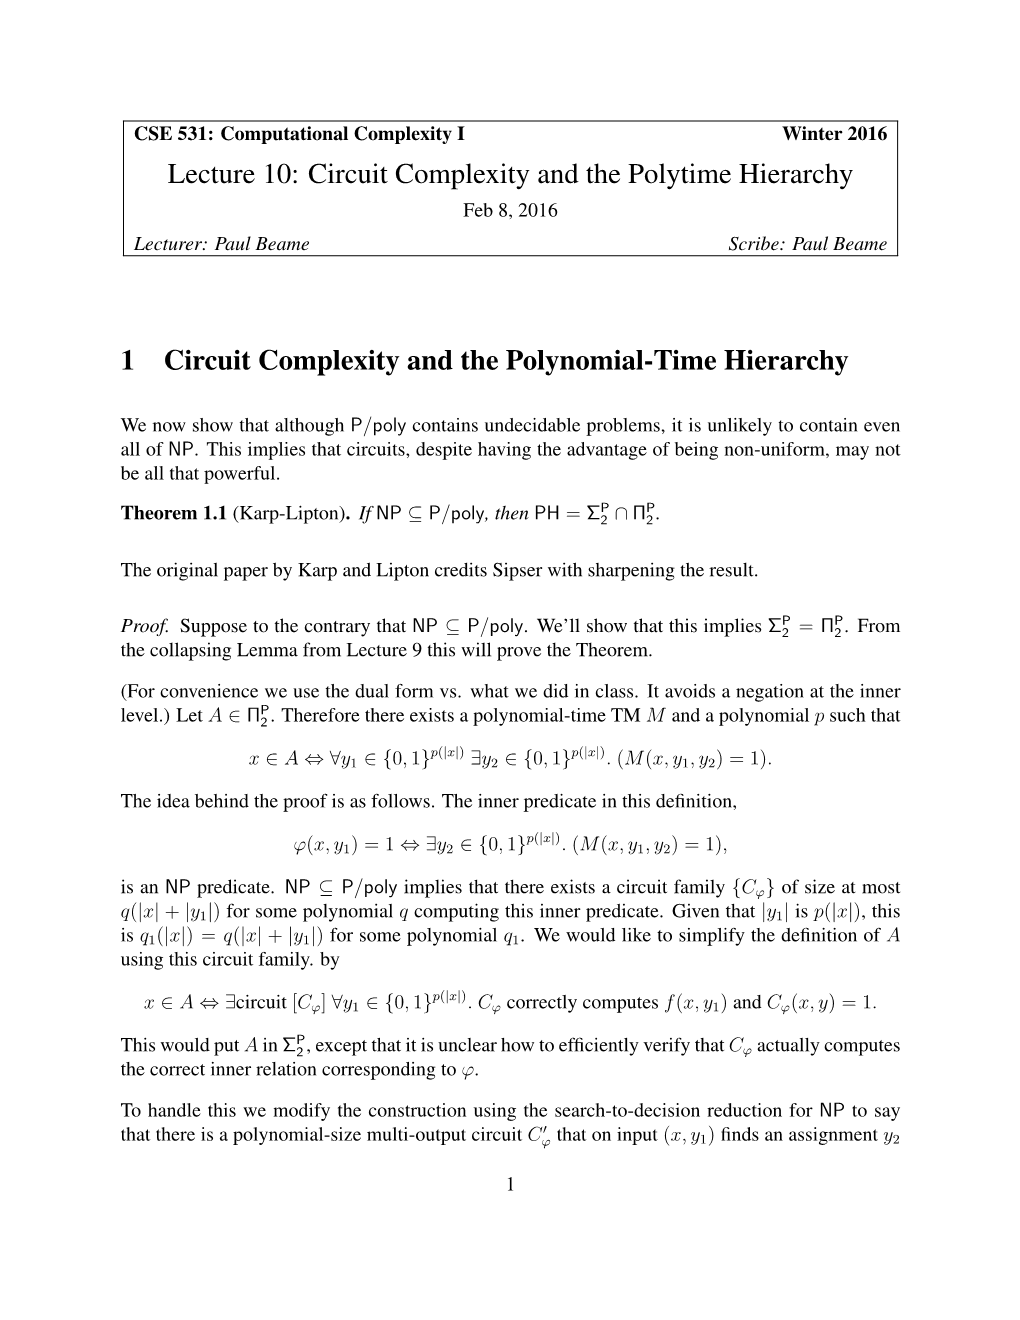 Lecture 10: Circuit Complexity and the Polytime Hierarchy 1 Circuit Complexity and the Polynomial-Time Hierarchy